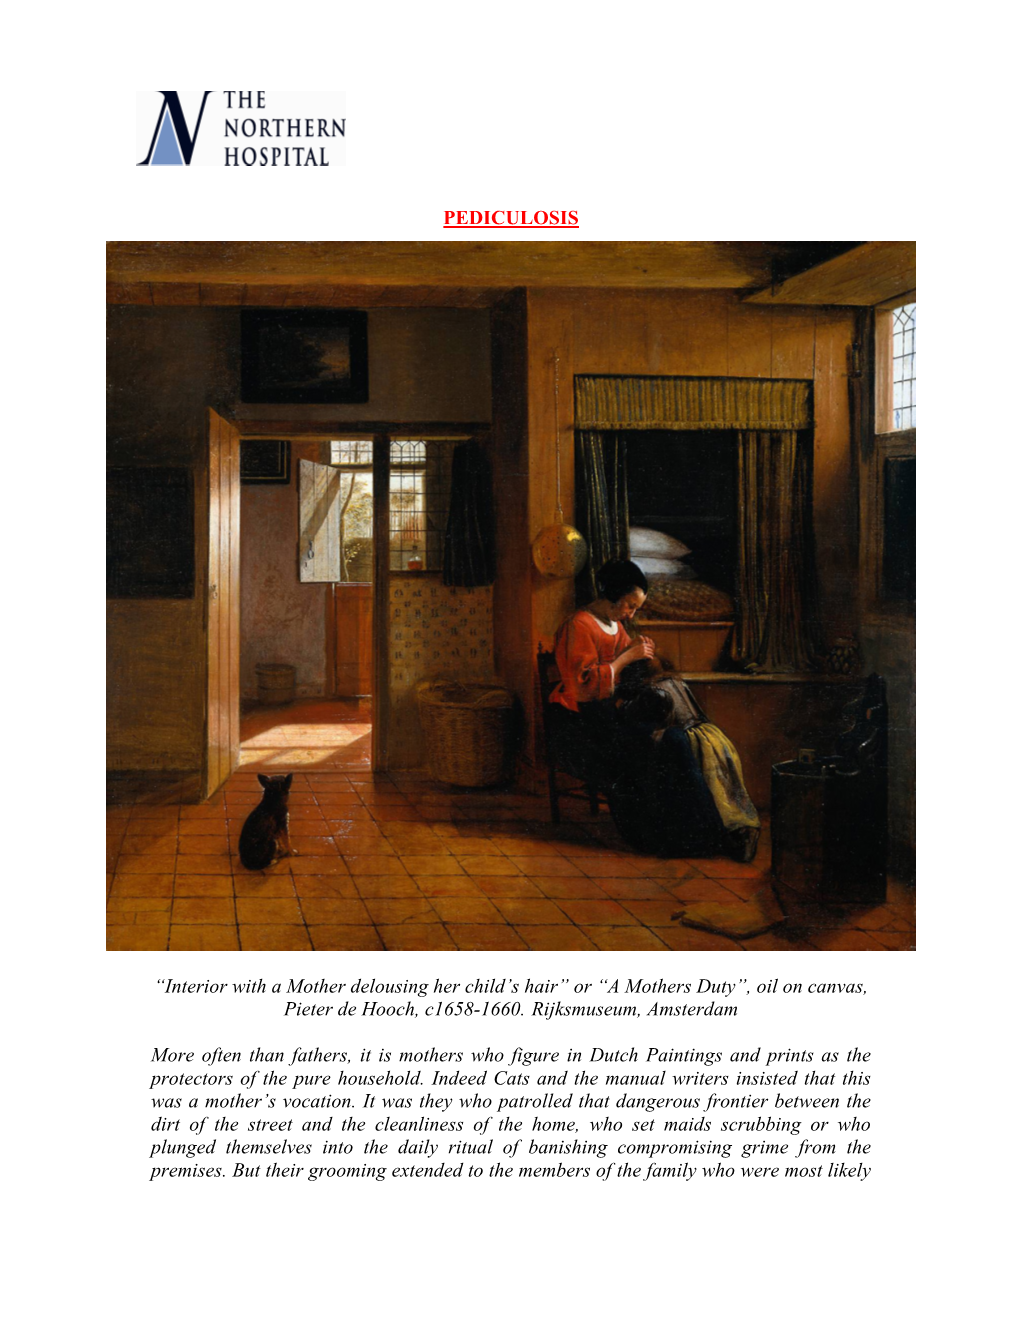 PEDICULOSIS “Interior with a Mother Delousing Her Child's Hair” Or “A Mothers Duty”, Oil on Canvas, Pieter De Hooch, C